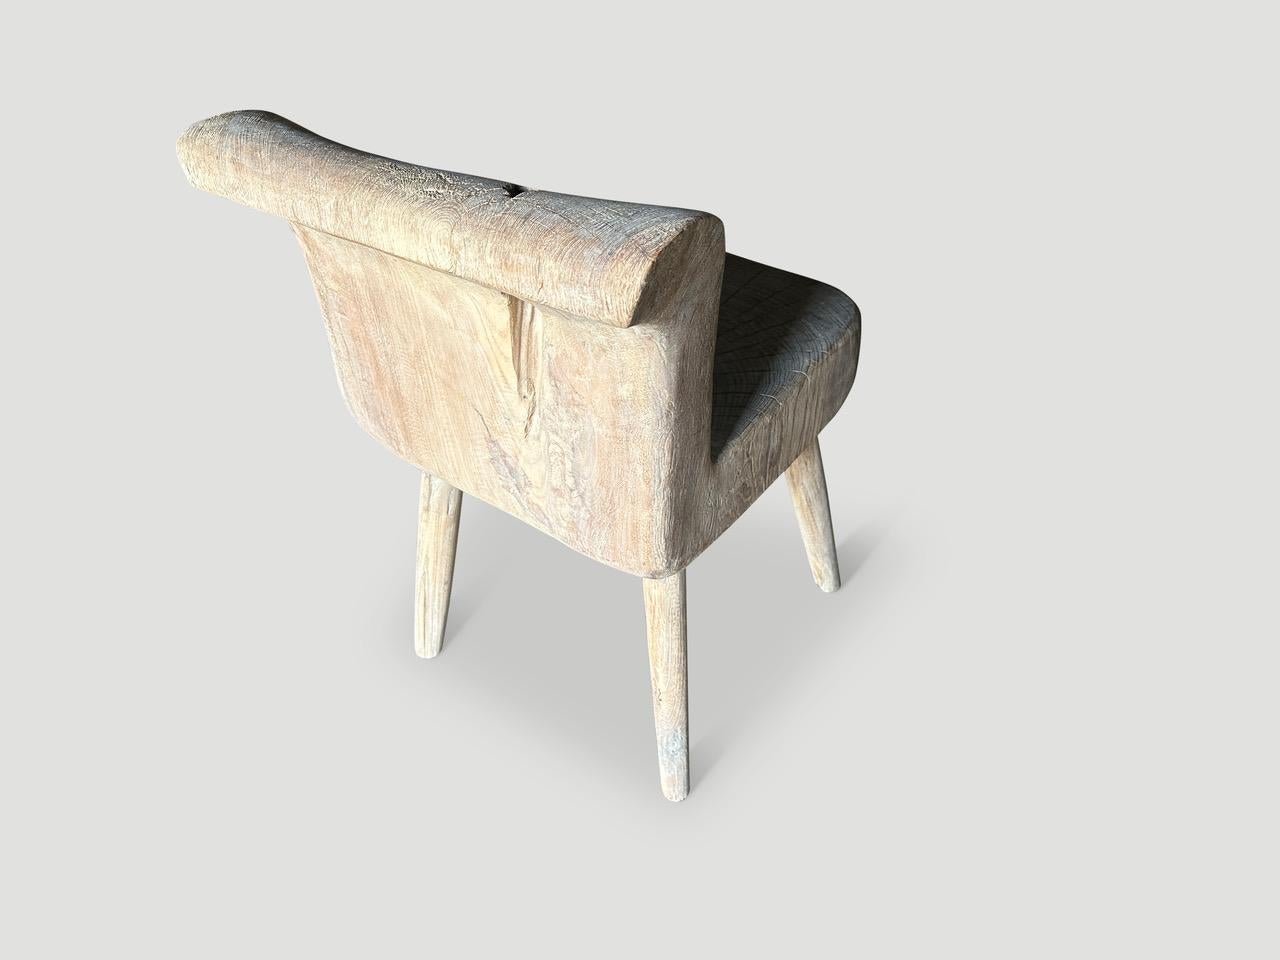 Andrianna Shamaris Sculptural Teak Wood Chair or Side Table In Excellent Condition For Sale In New York, NY